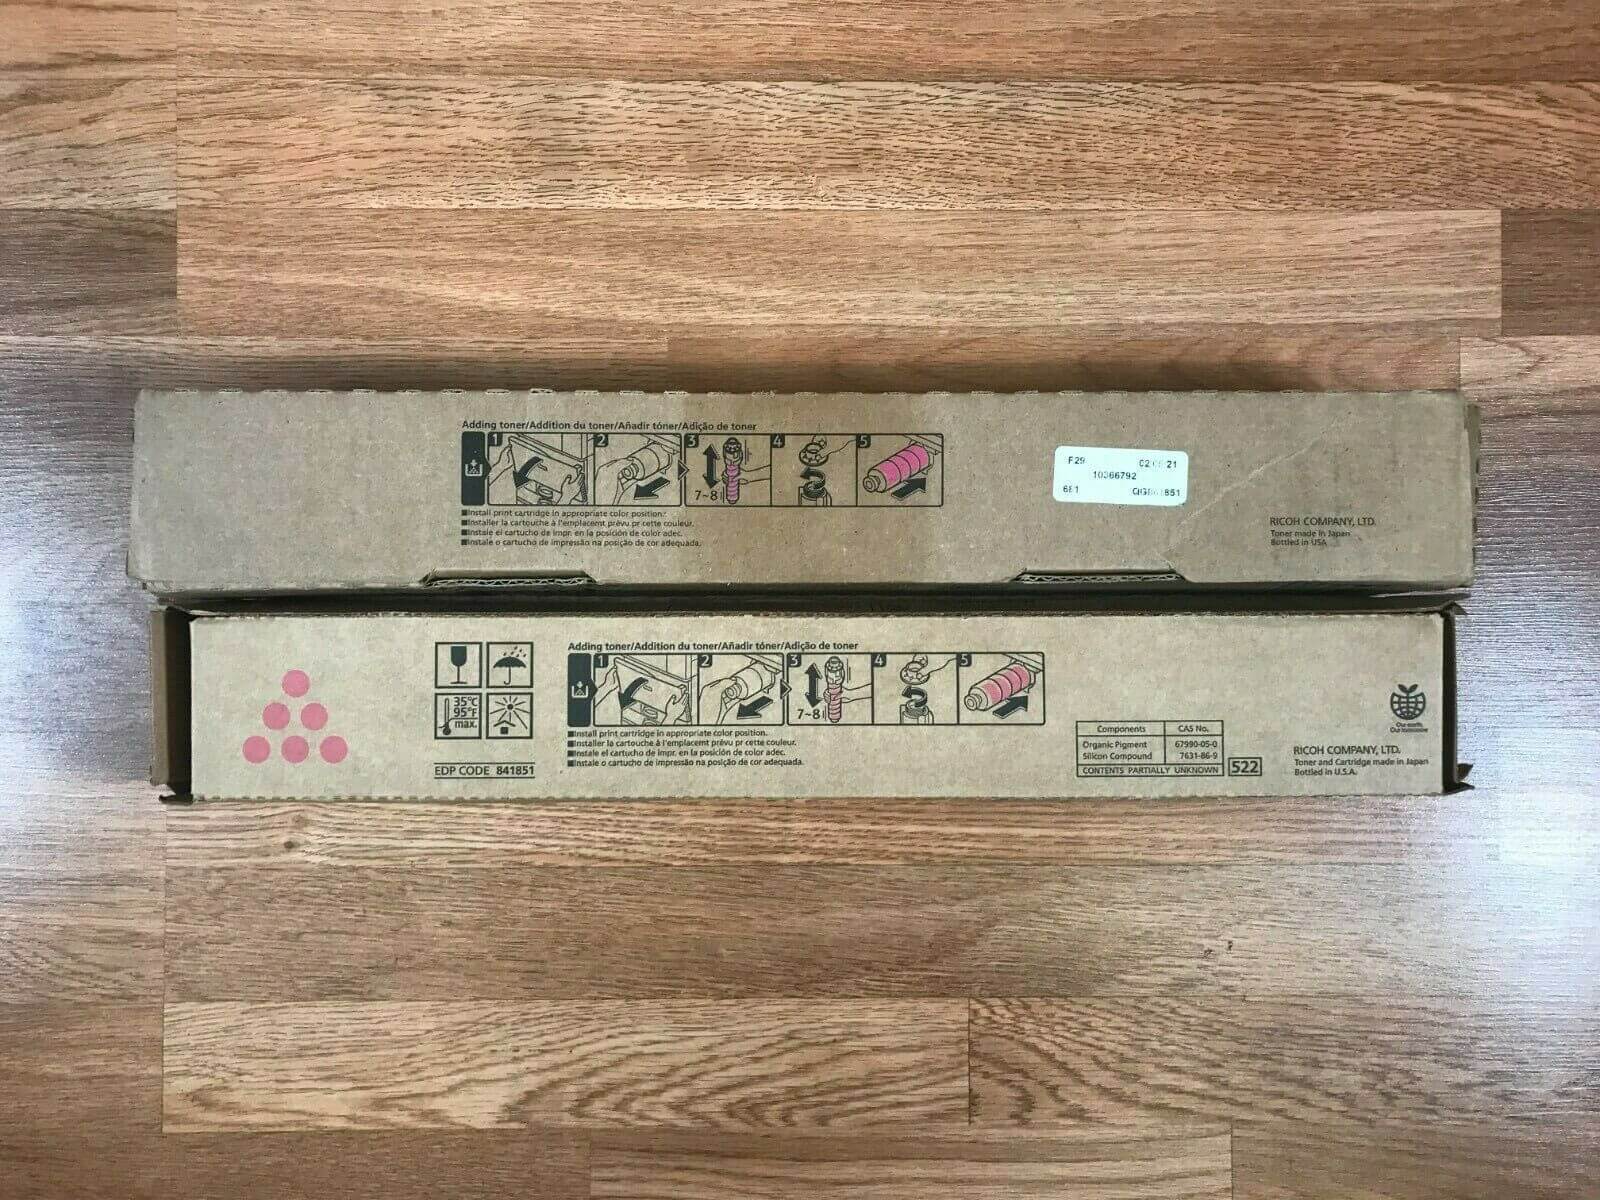 Lot Of 2 Ricoh MP C6003 Magenta EDP:841851 For MP C6003 Same Day Shipping!!! - copier-clearance-center